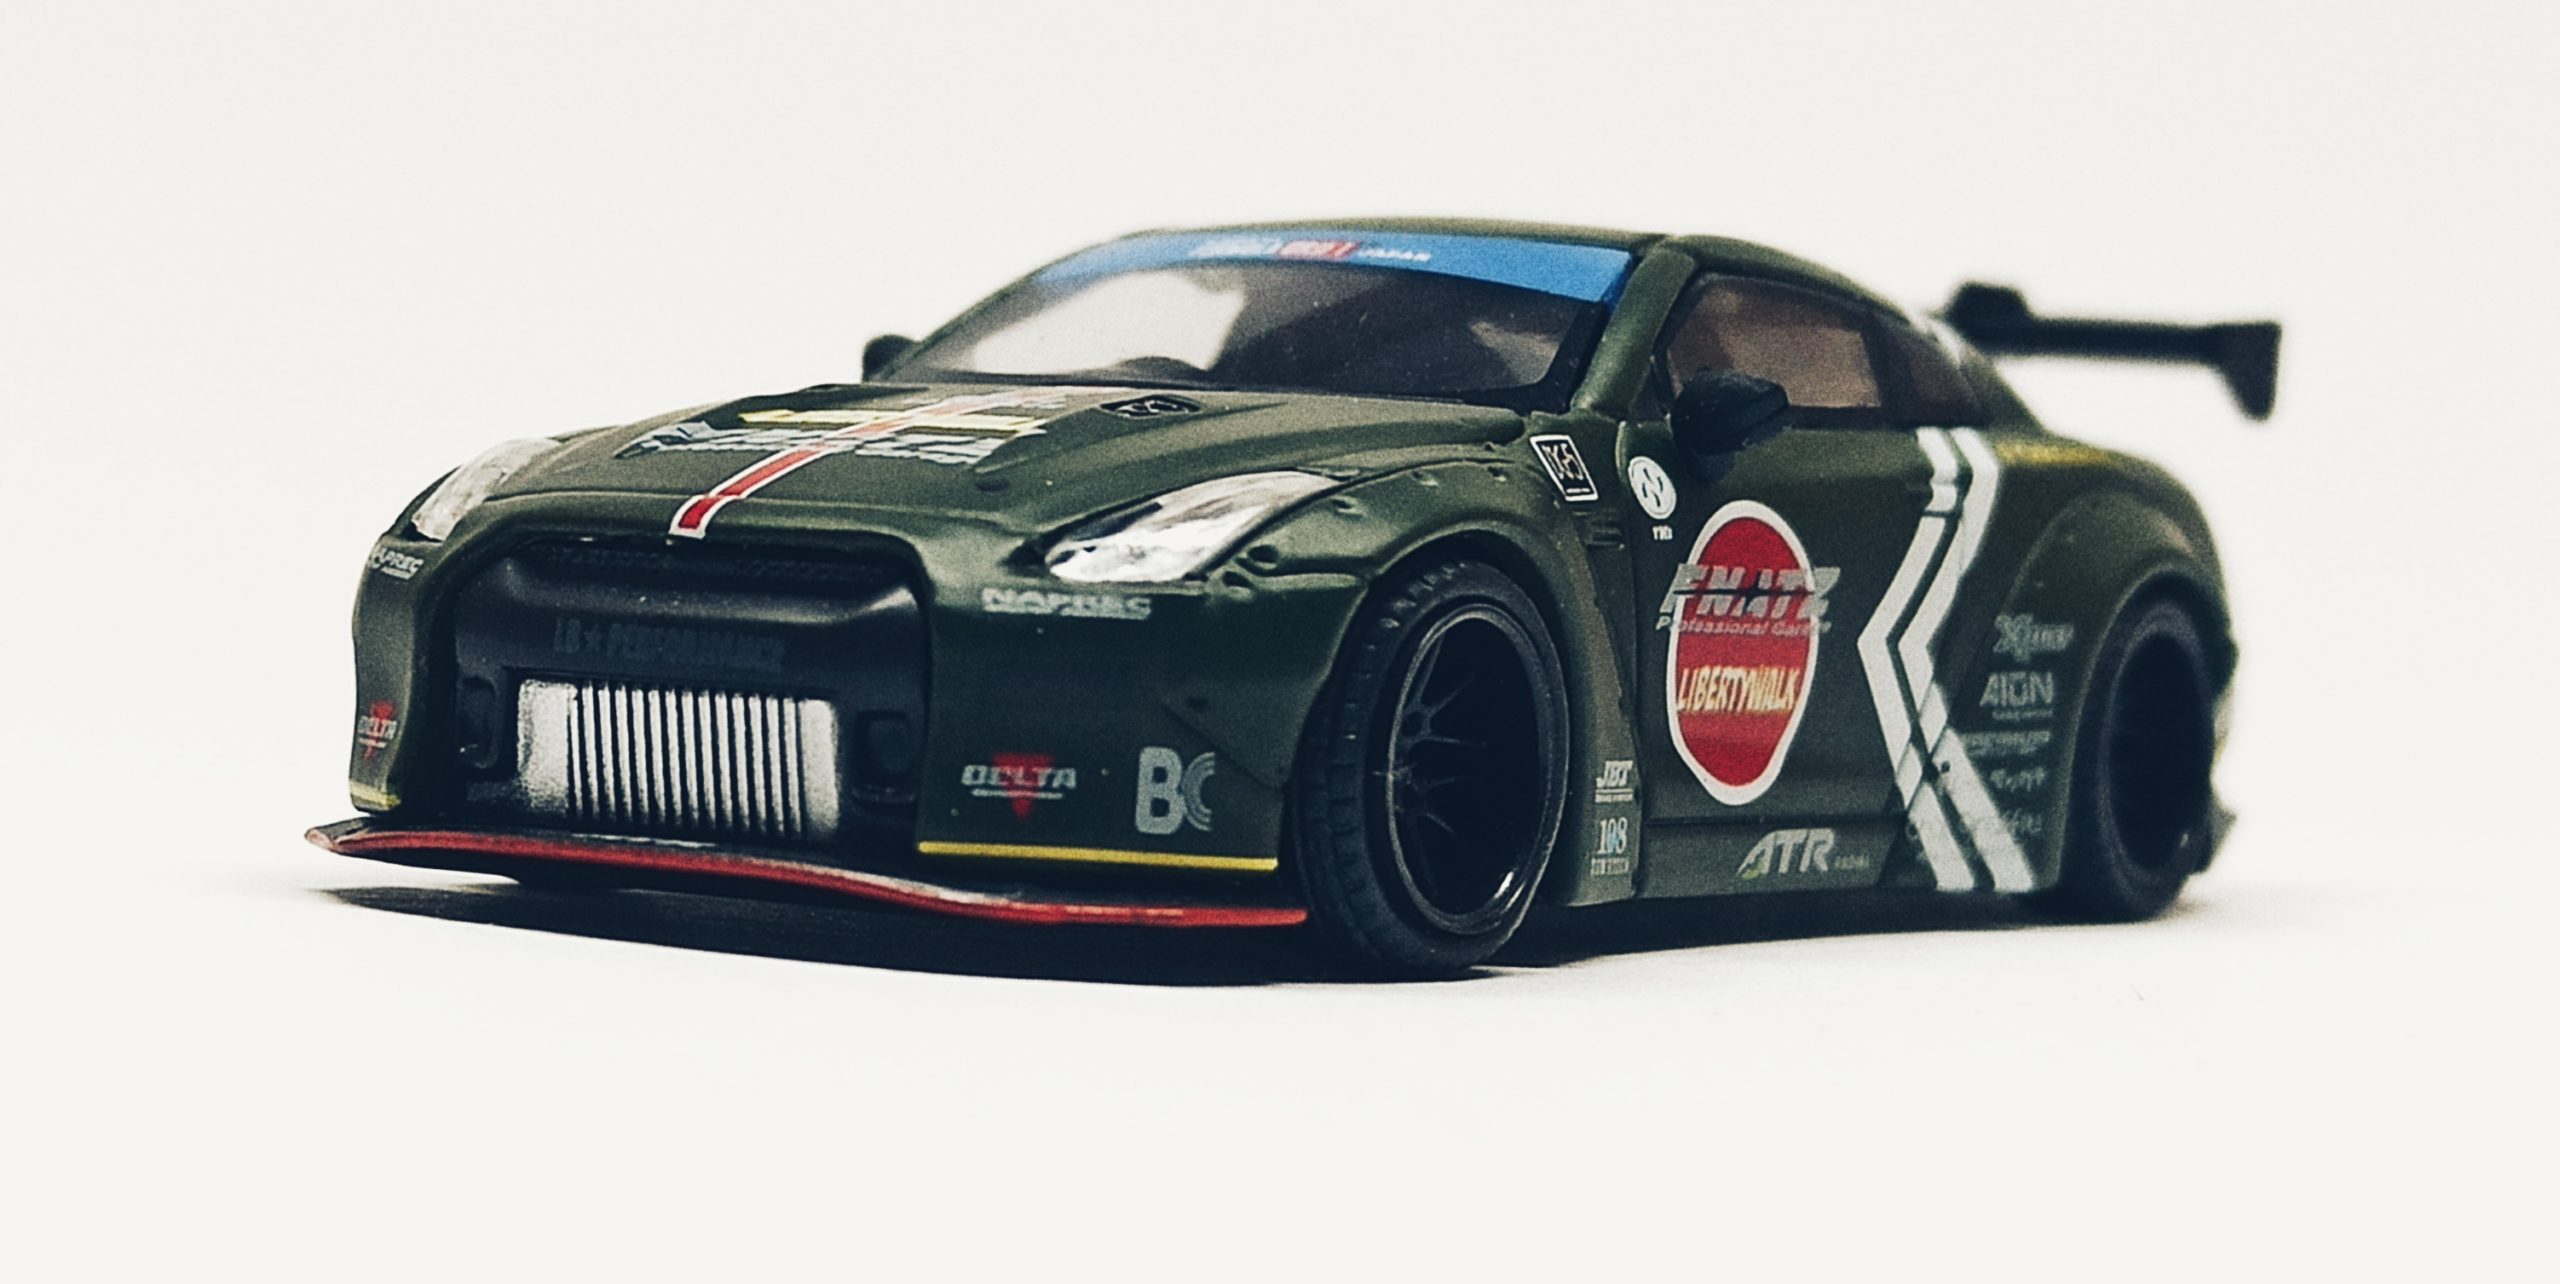 Mini GT Nissan GT-R (R35) (MGT00007-R) 2018 Liberty Walk LB★Works Type 1 Rear Wing ver 1 Zero Fighter Special (RHD) side angle